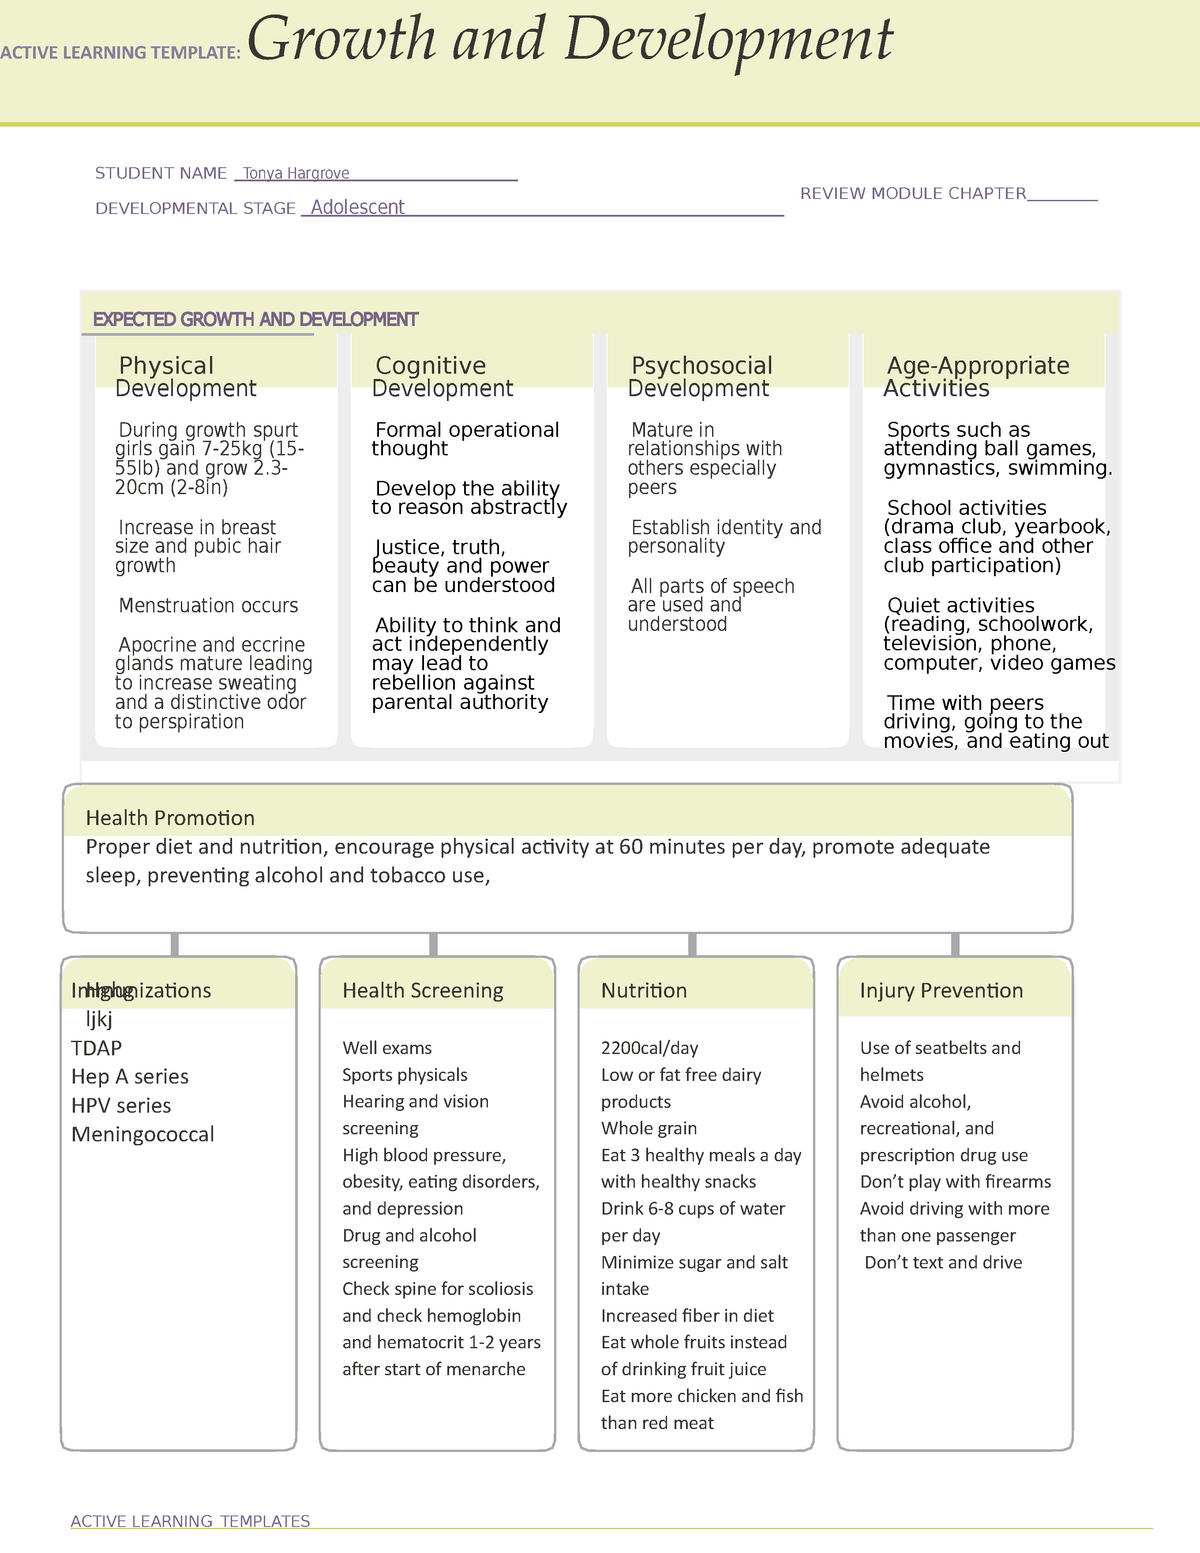 growth-development-adolescent-active-learning-template-growth-and